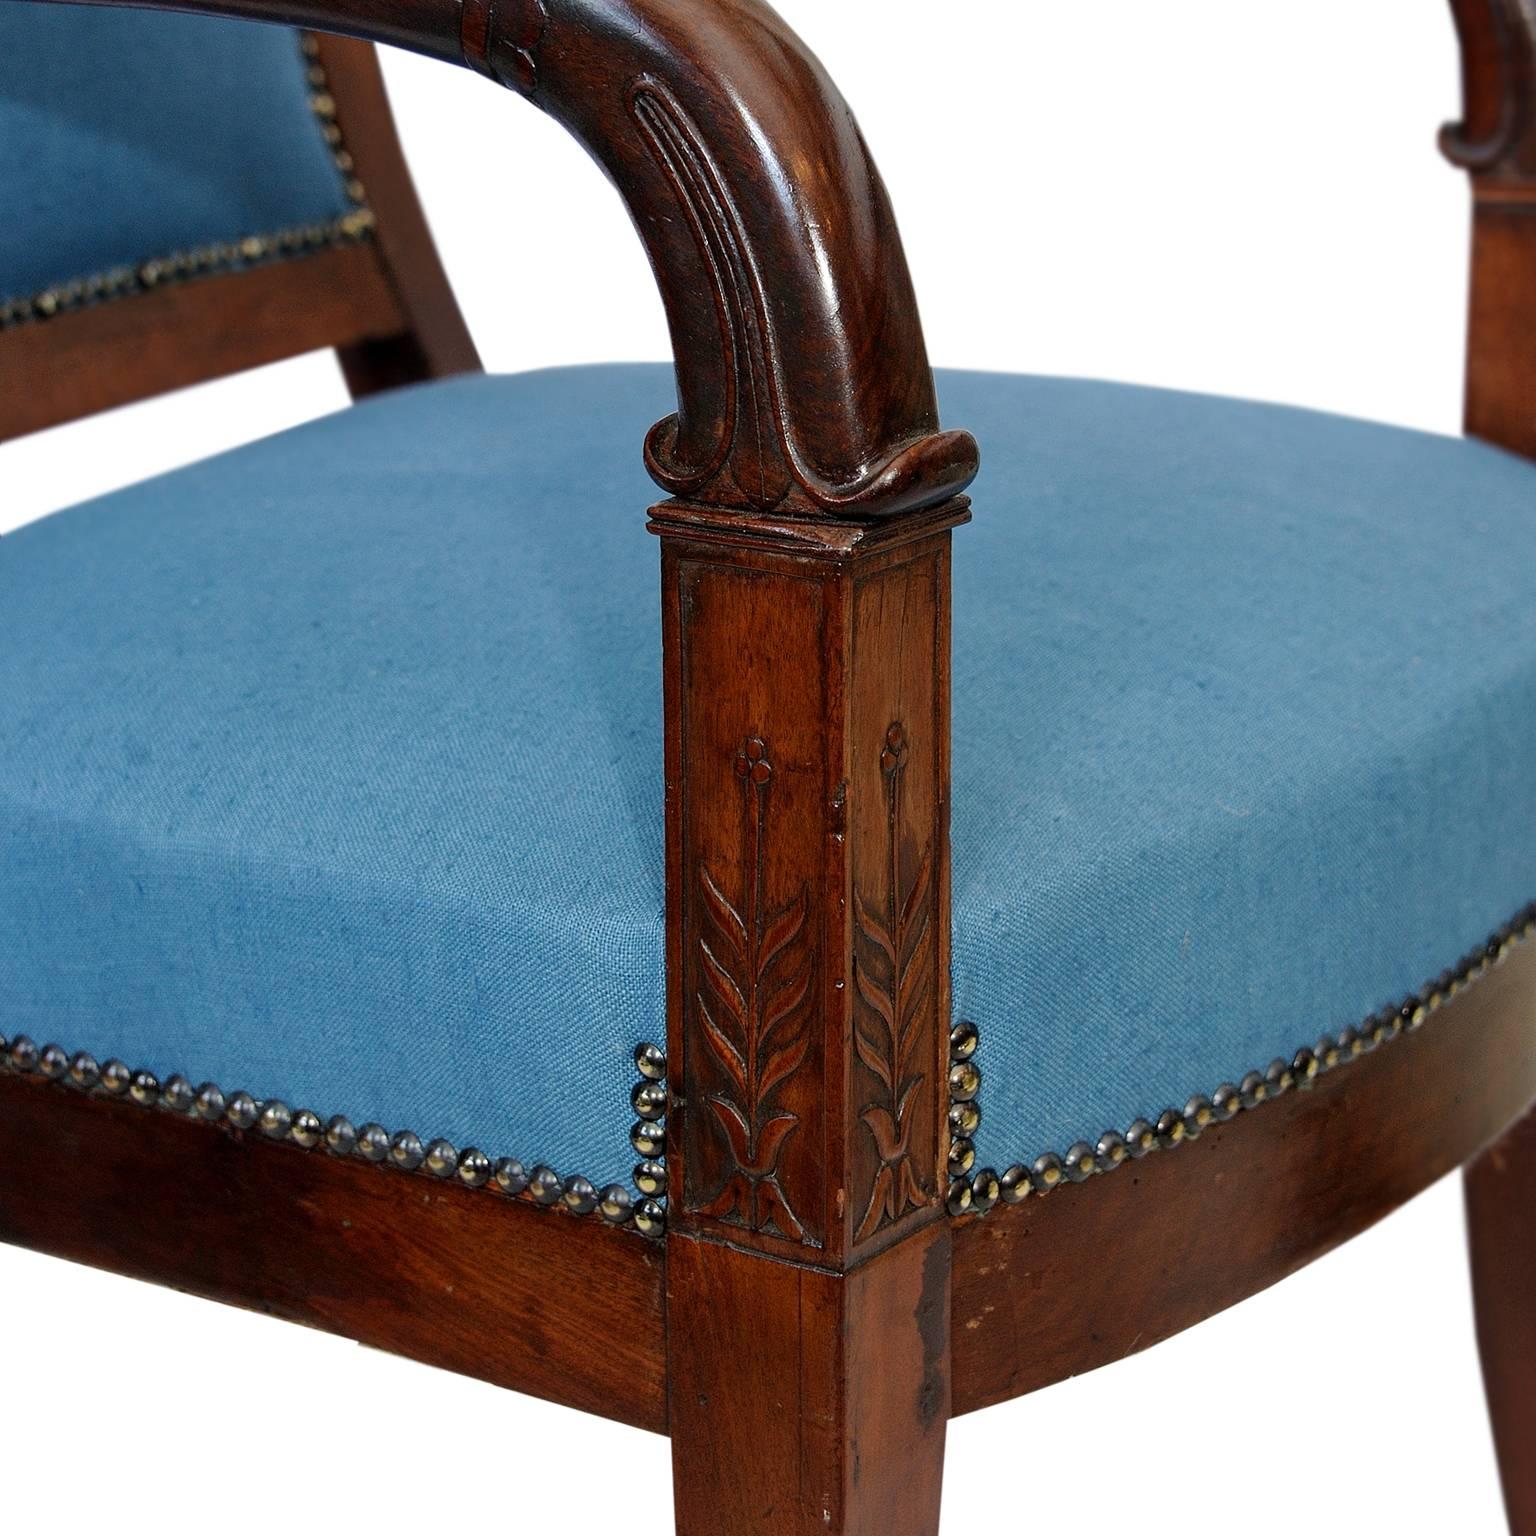 Polished French Empire Napoleonic Period Mahogany Open Armchair, circa 1820 For Sale